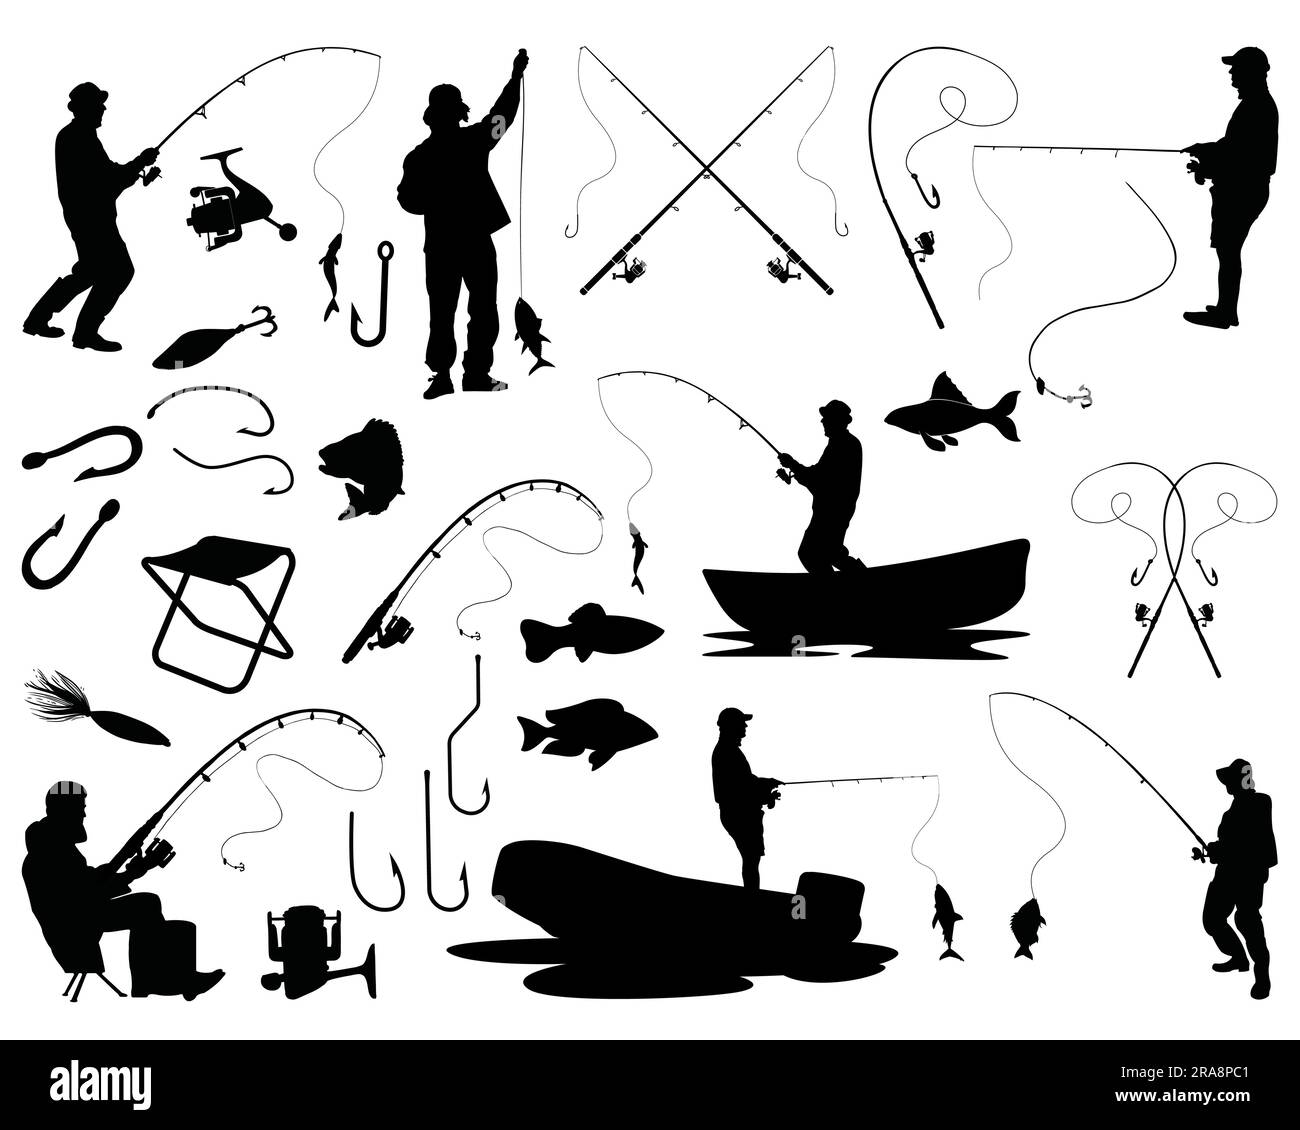 Silhouette of man fishing Stock Vector Images - Alamy